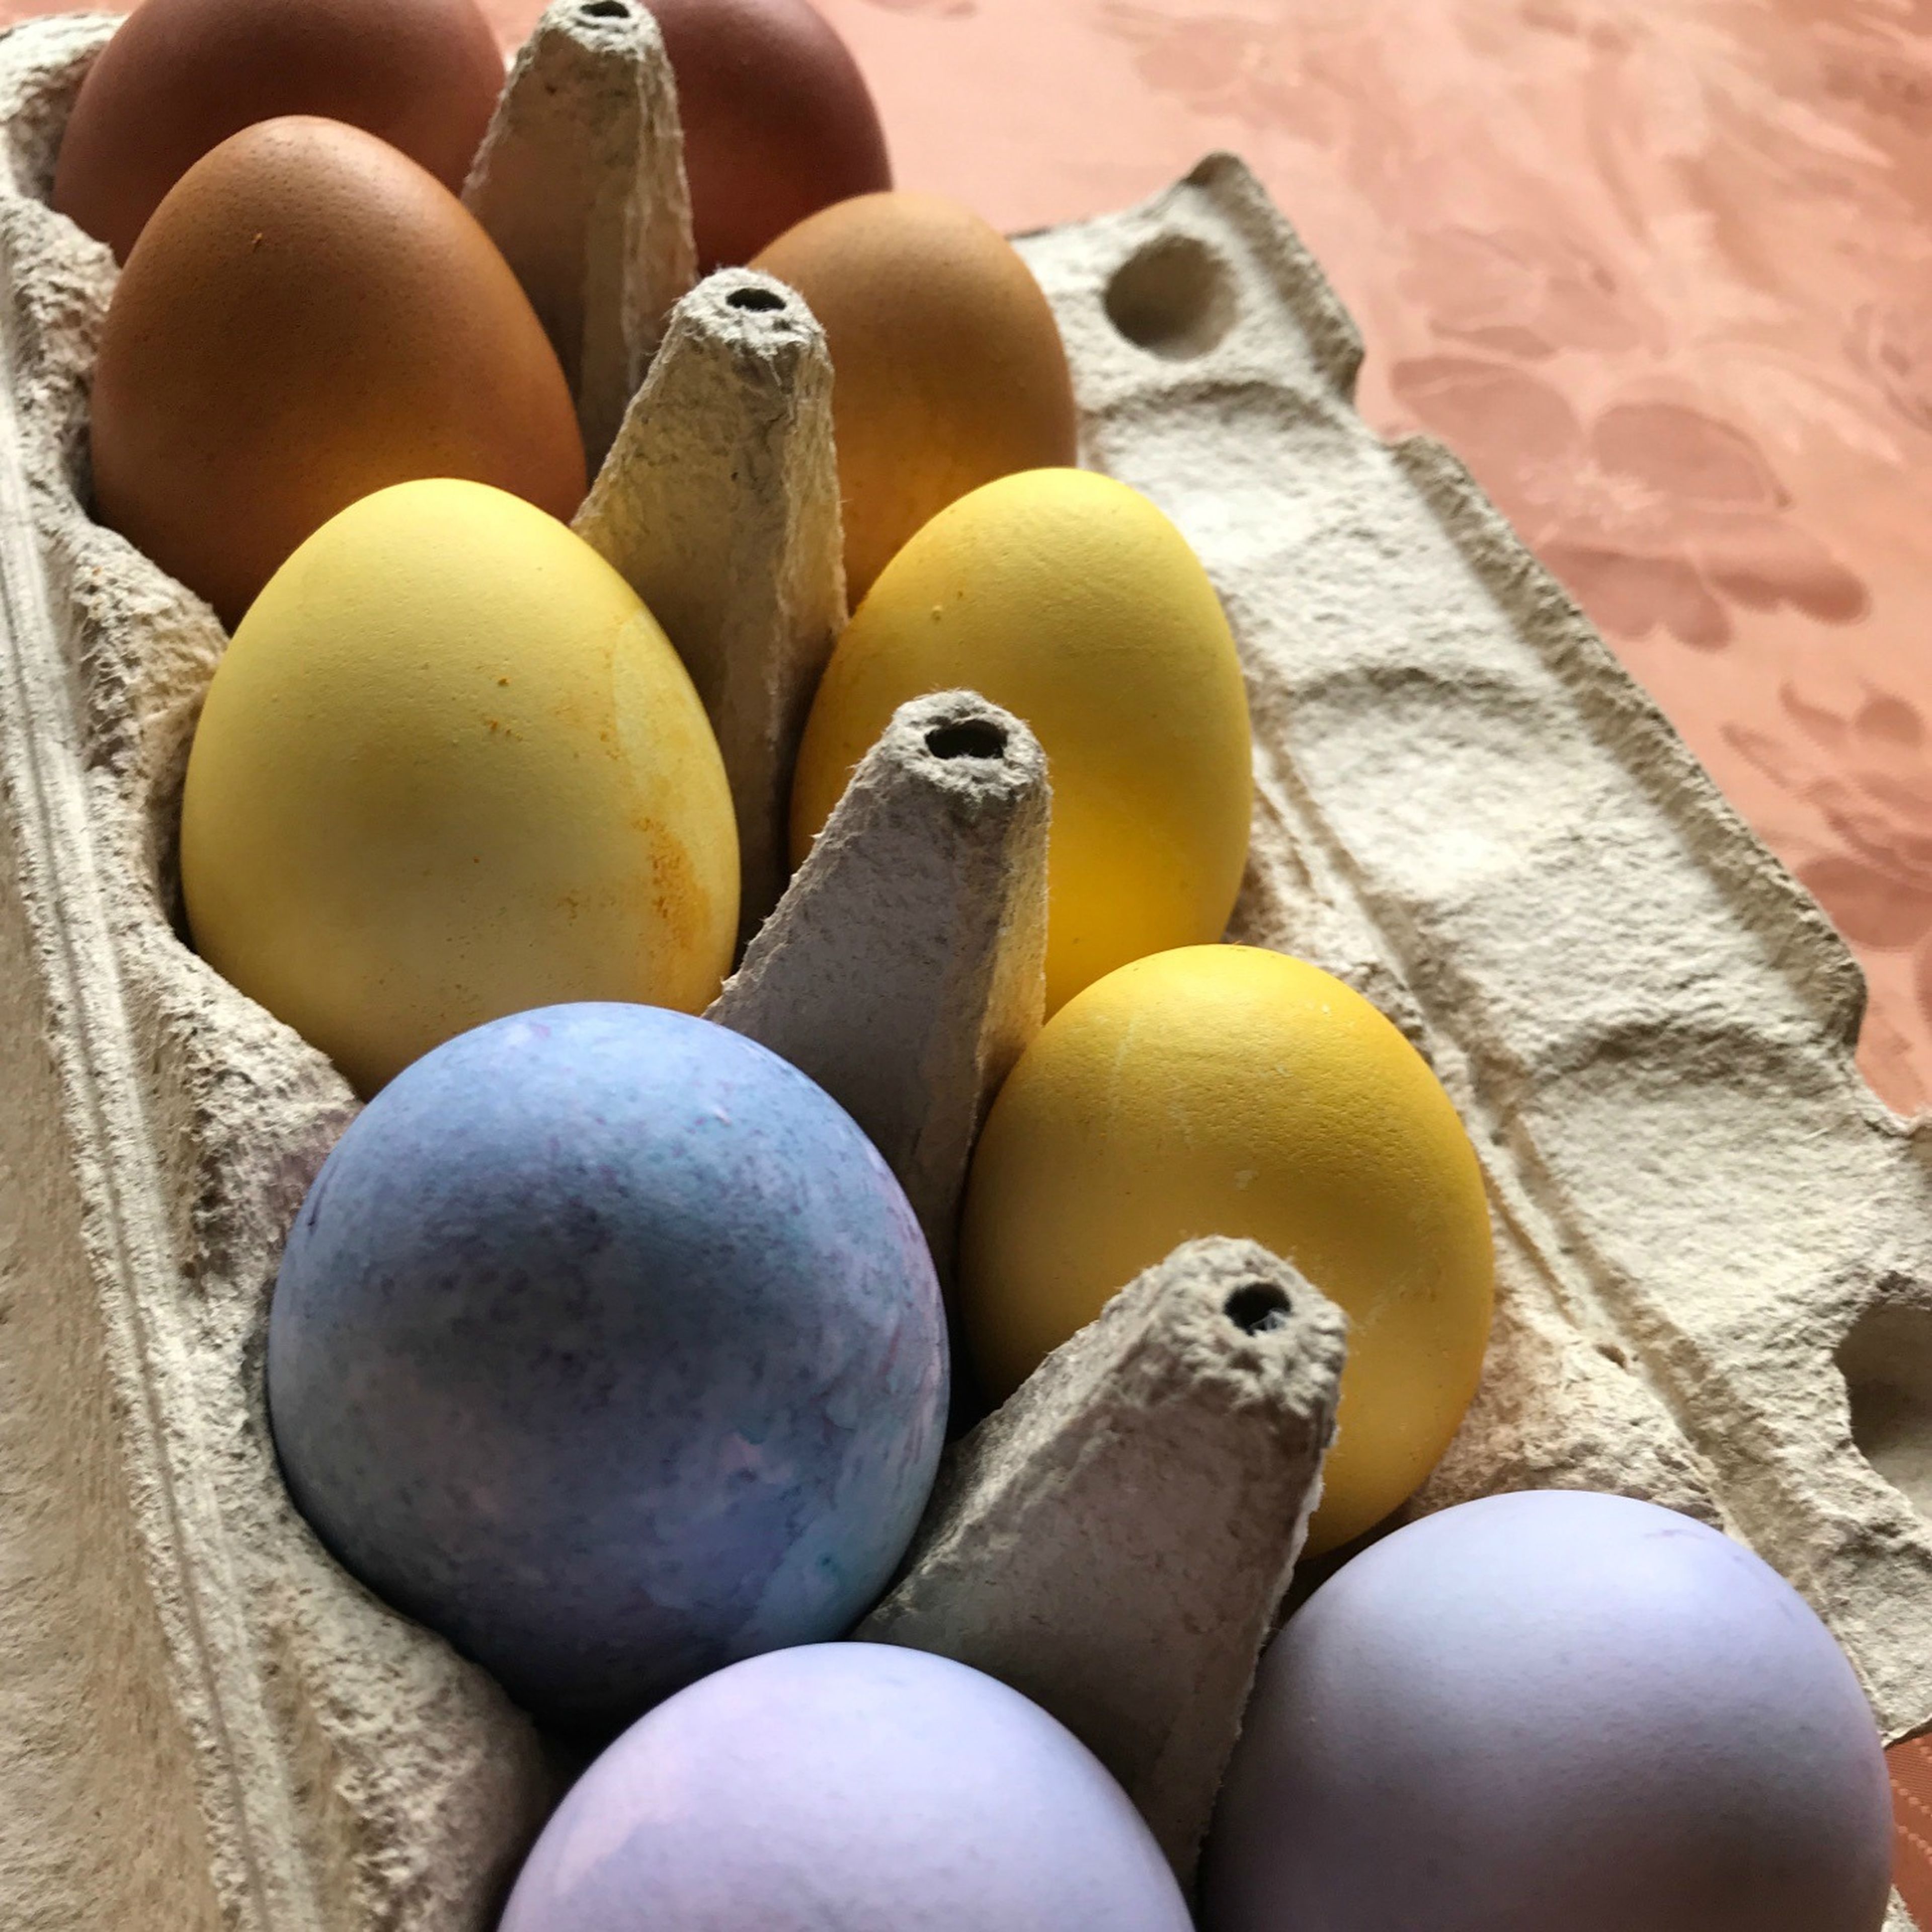 Naturally dyed Easter eggs